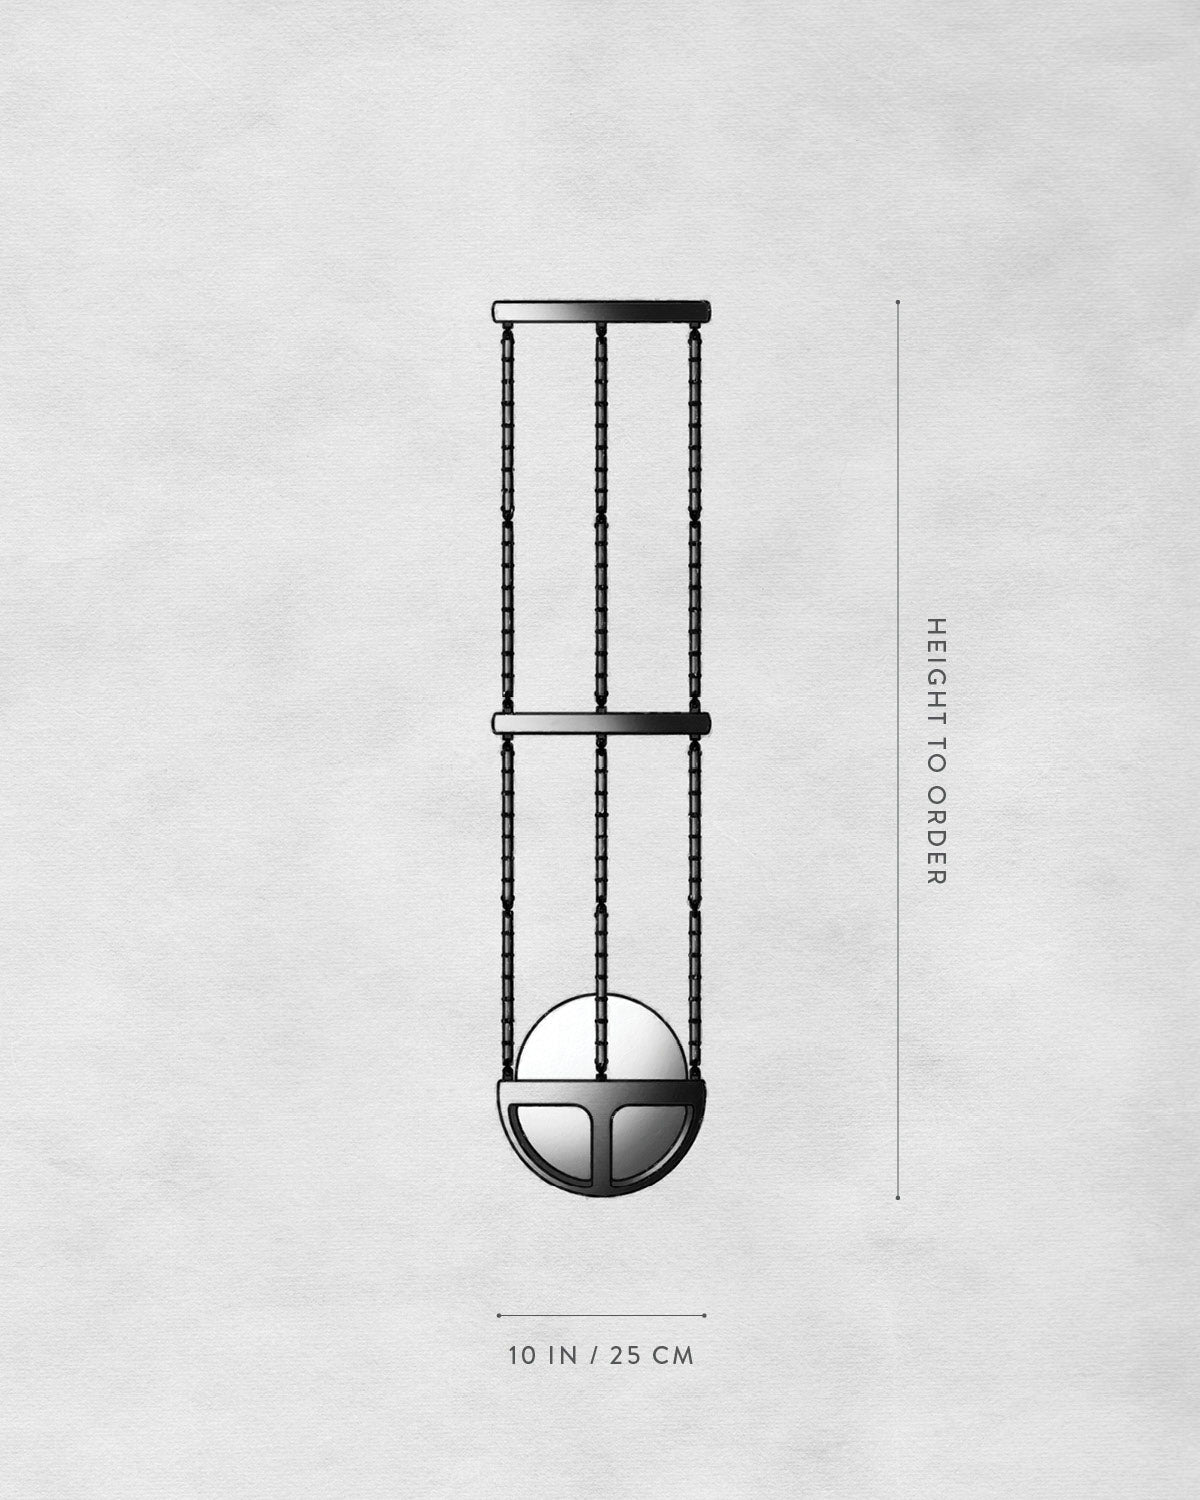 Technical drawing of REPRISE : PENDANT SMALL.